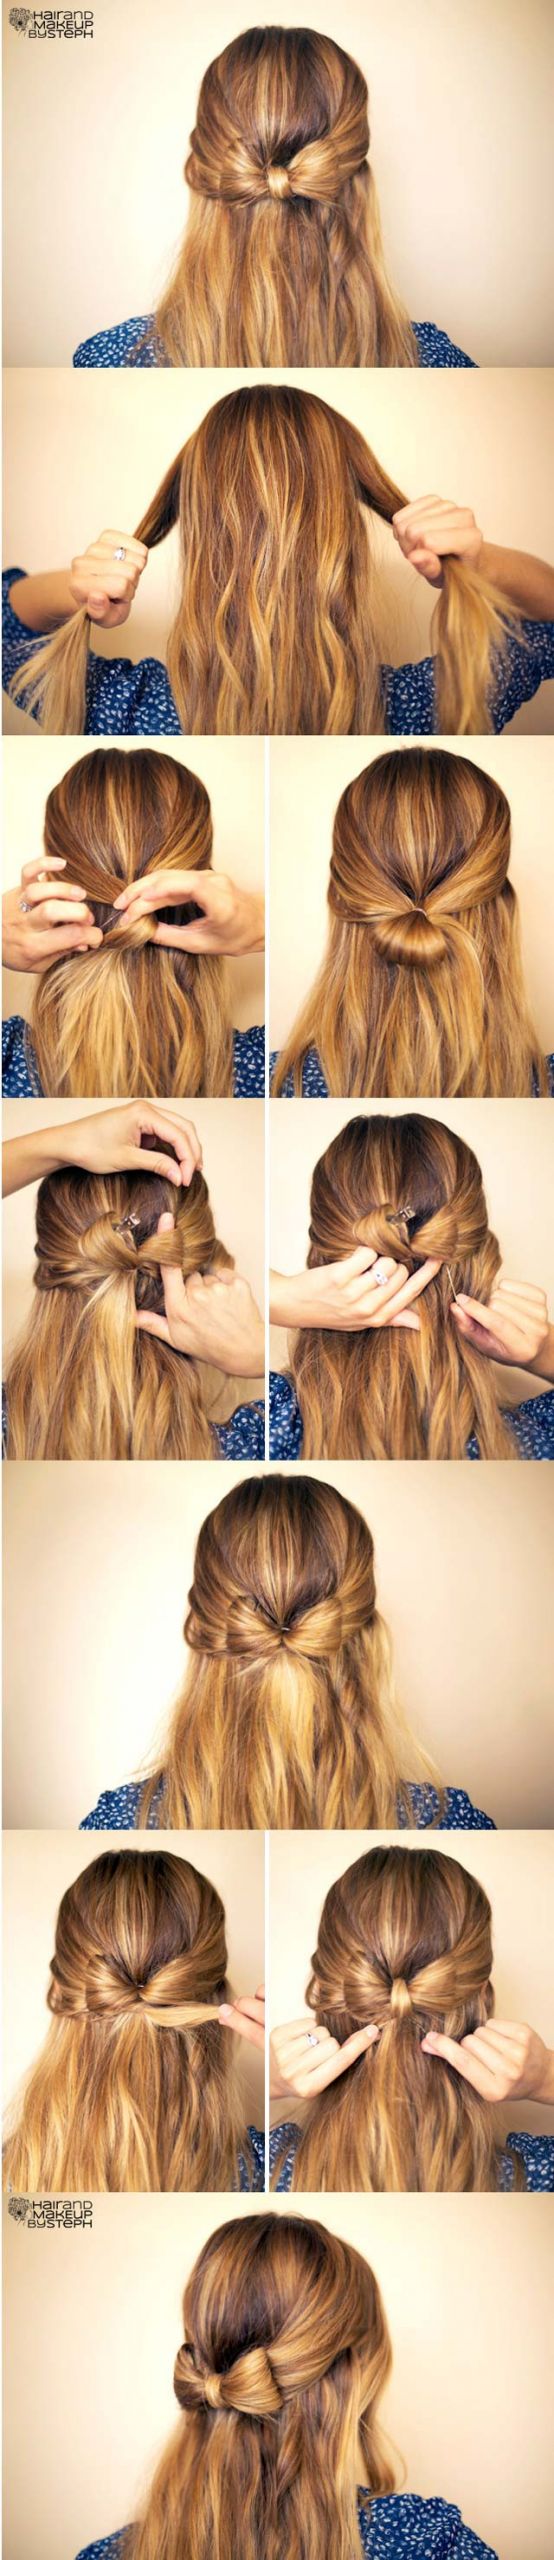 DIY Your Hair
 DIY Your Step by Step for the Best Cute Hairstyles